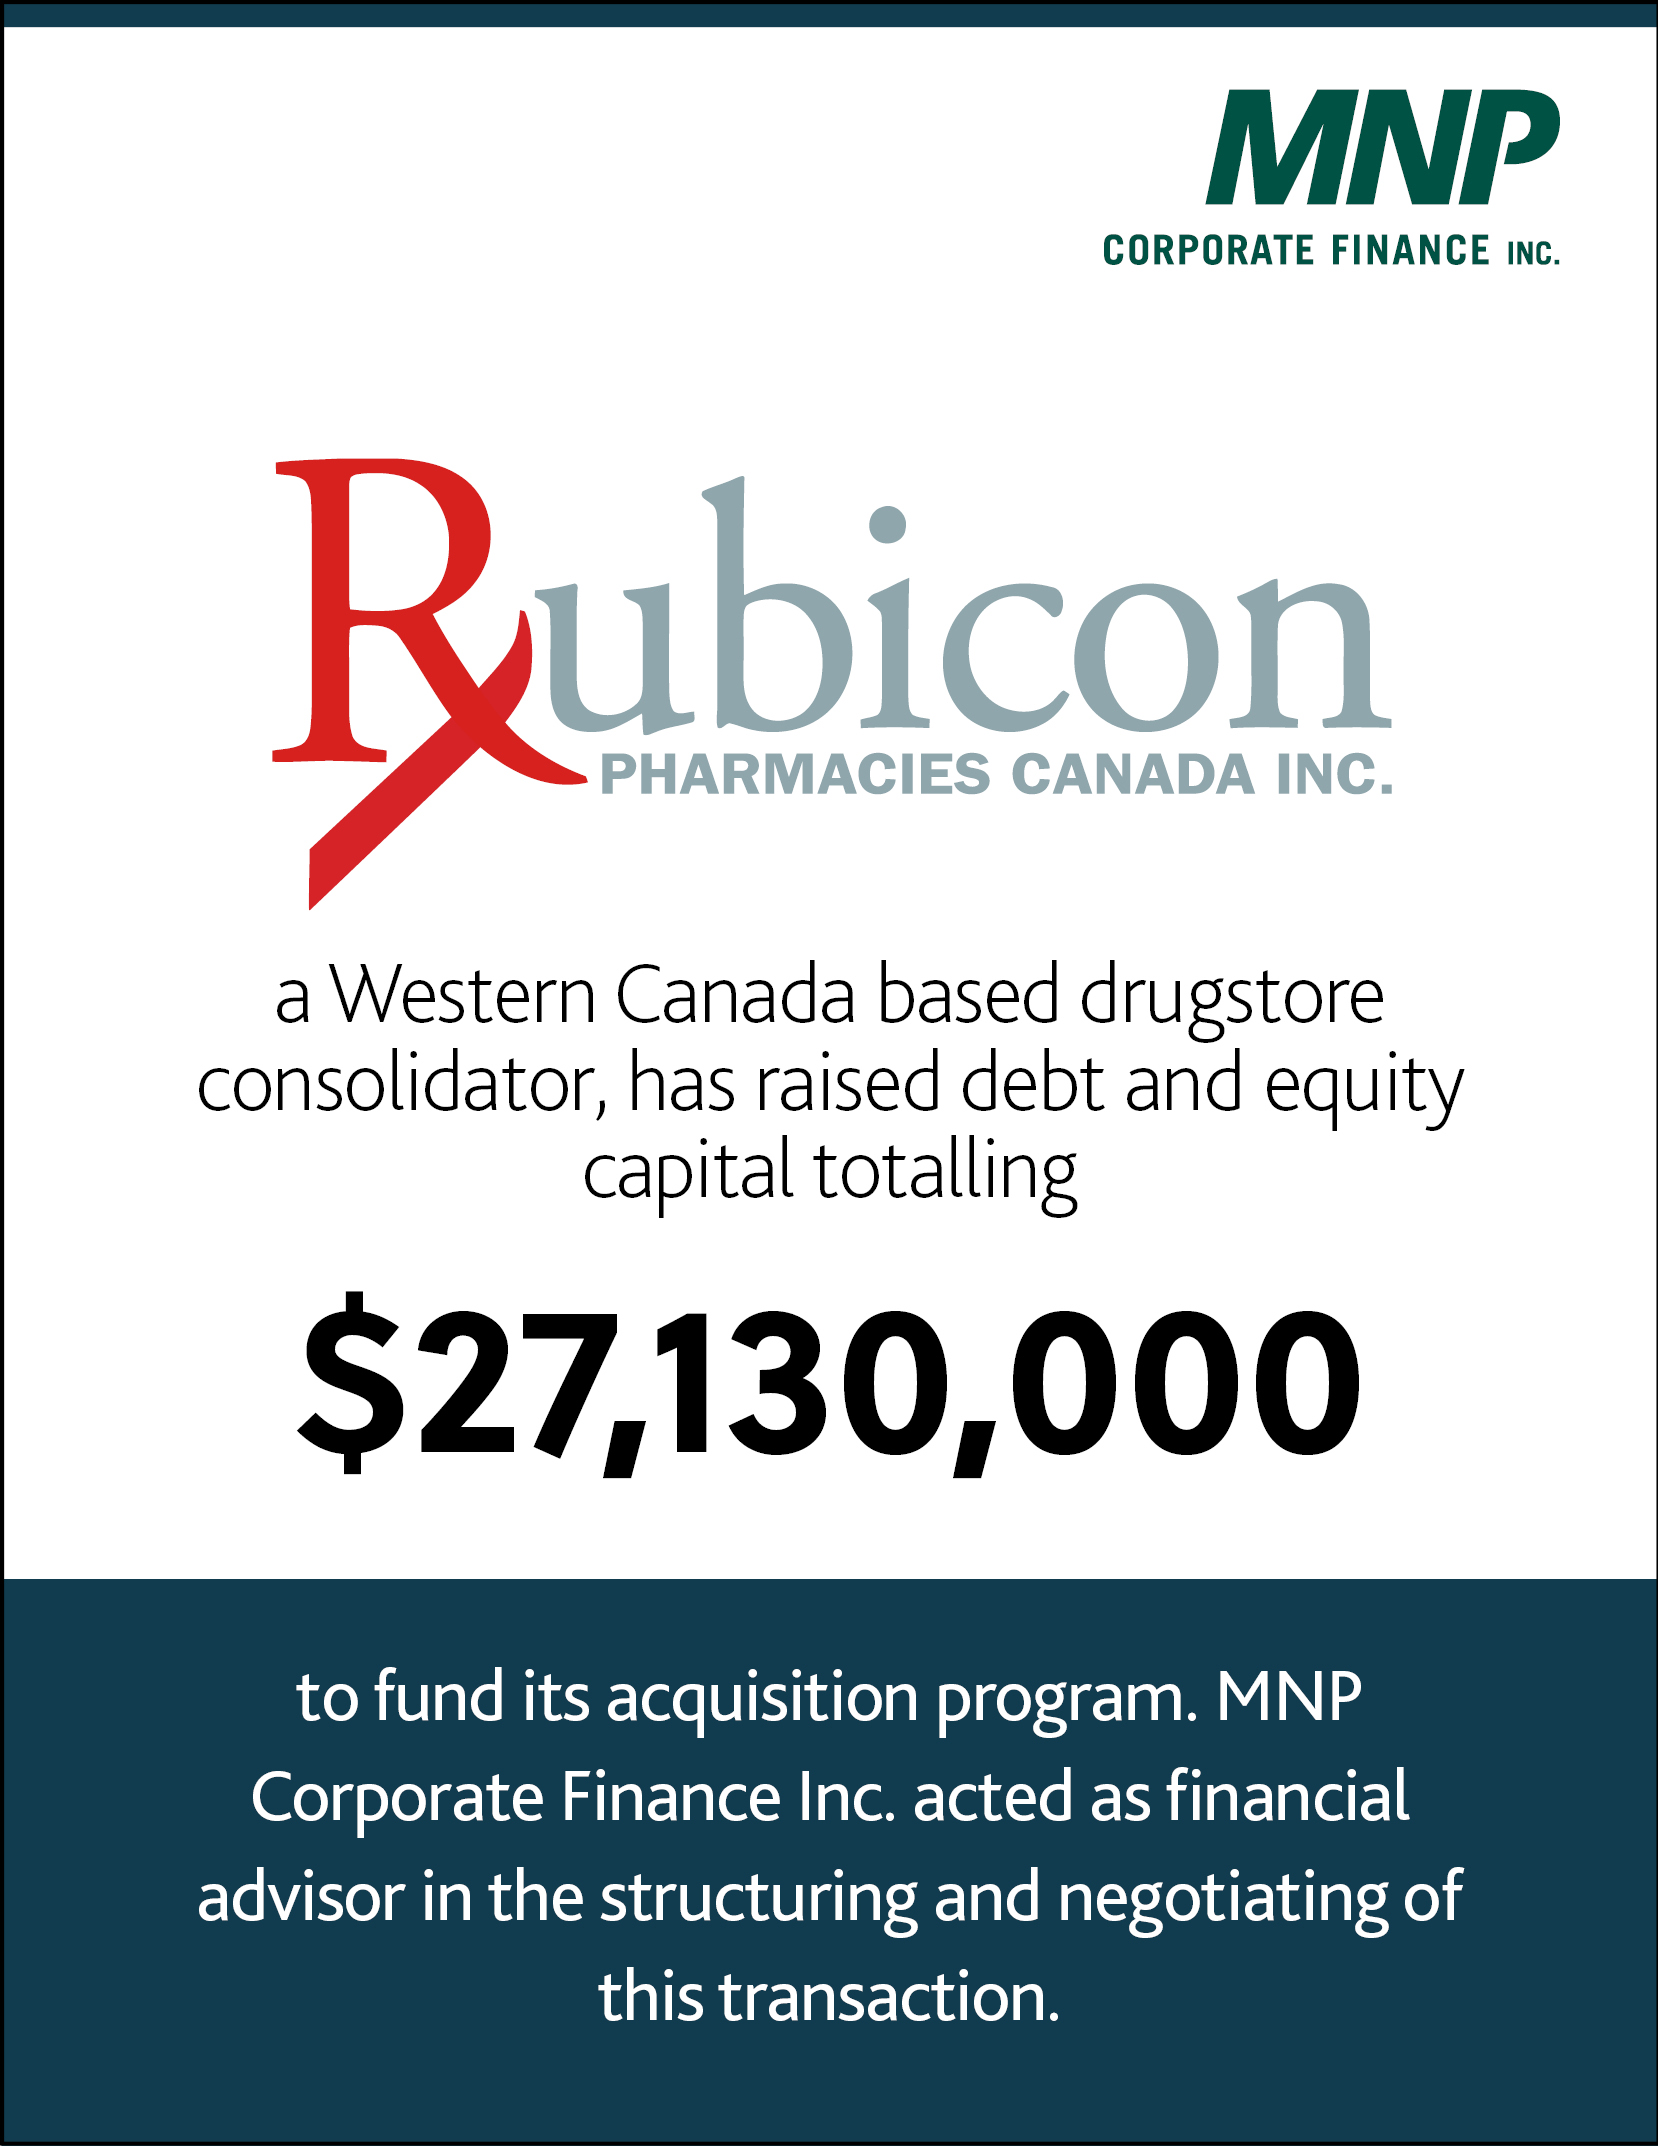 Rubicon Pharmacies Canada Inc a Western Canada based drugstore consolidator has raised debt and equity capital totaling $27,130,000